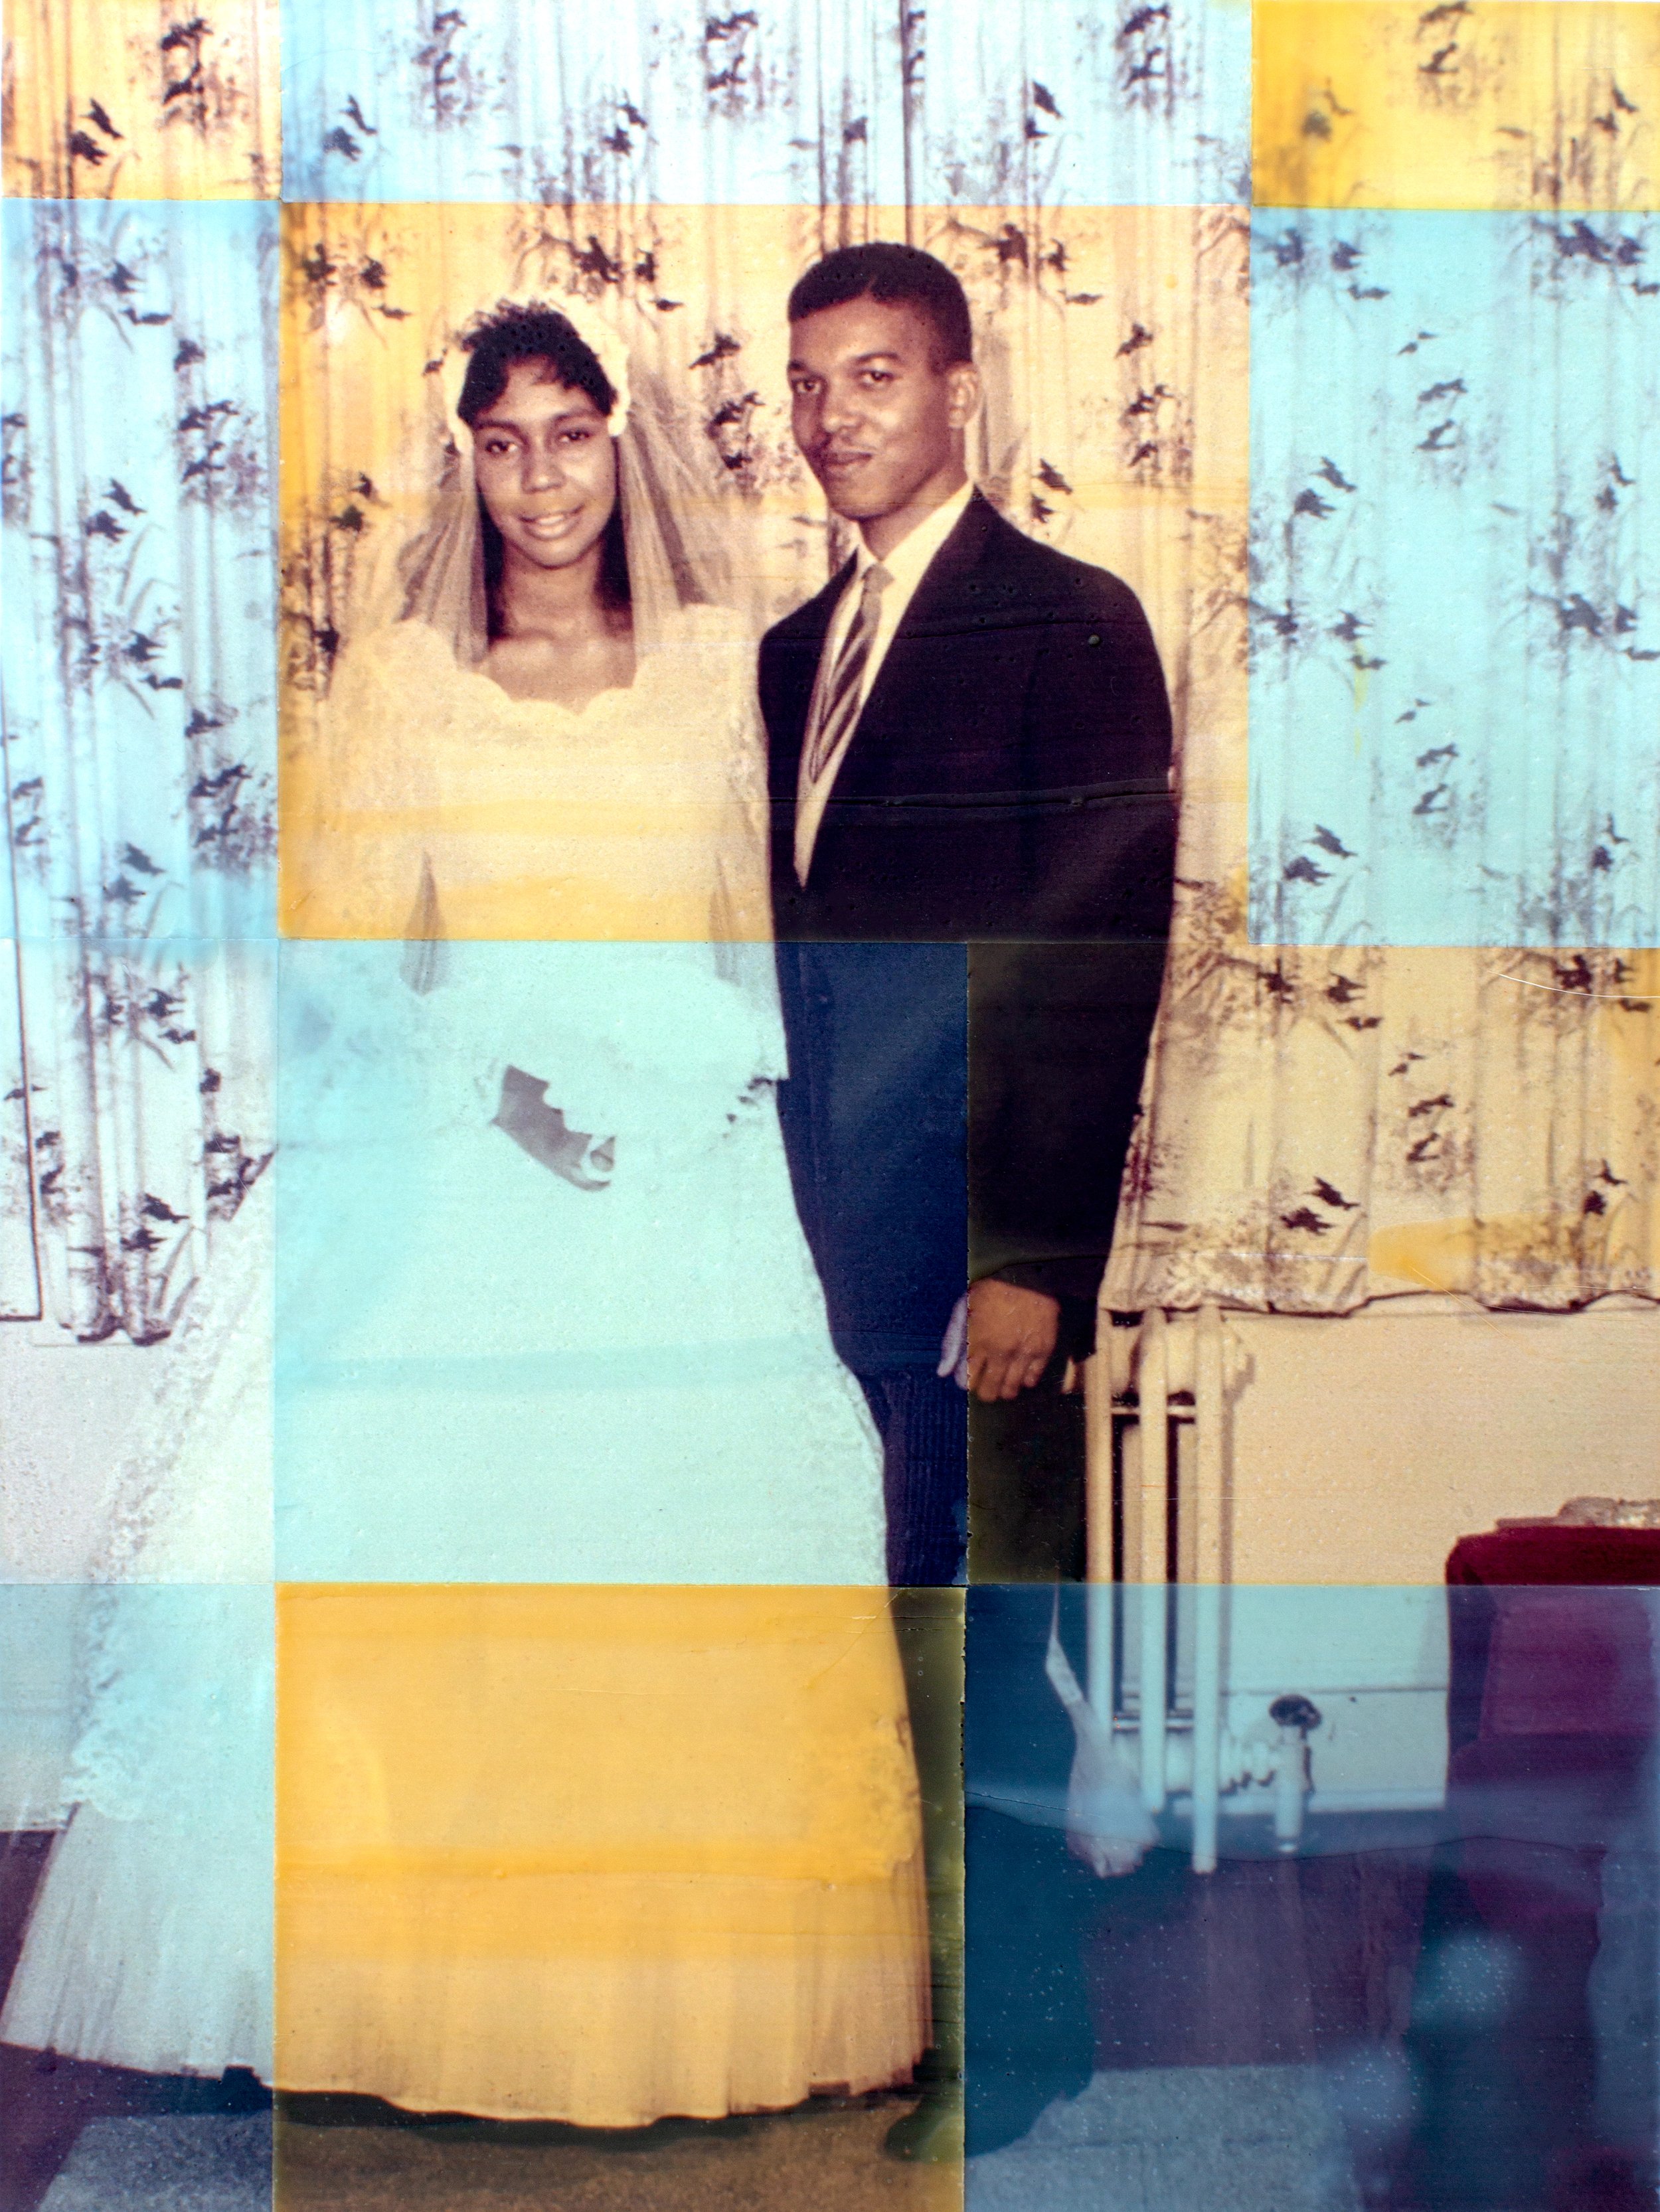  Newlyweds (1964), 2022  Encaustic wax on archival pigment print on canvas.  Commissioned by The New York Times. 